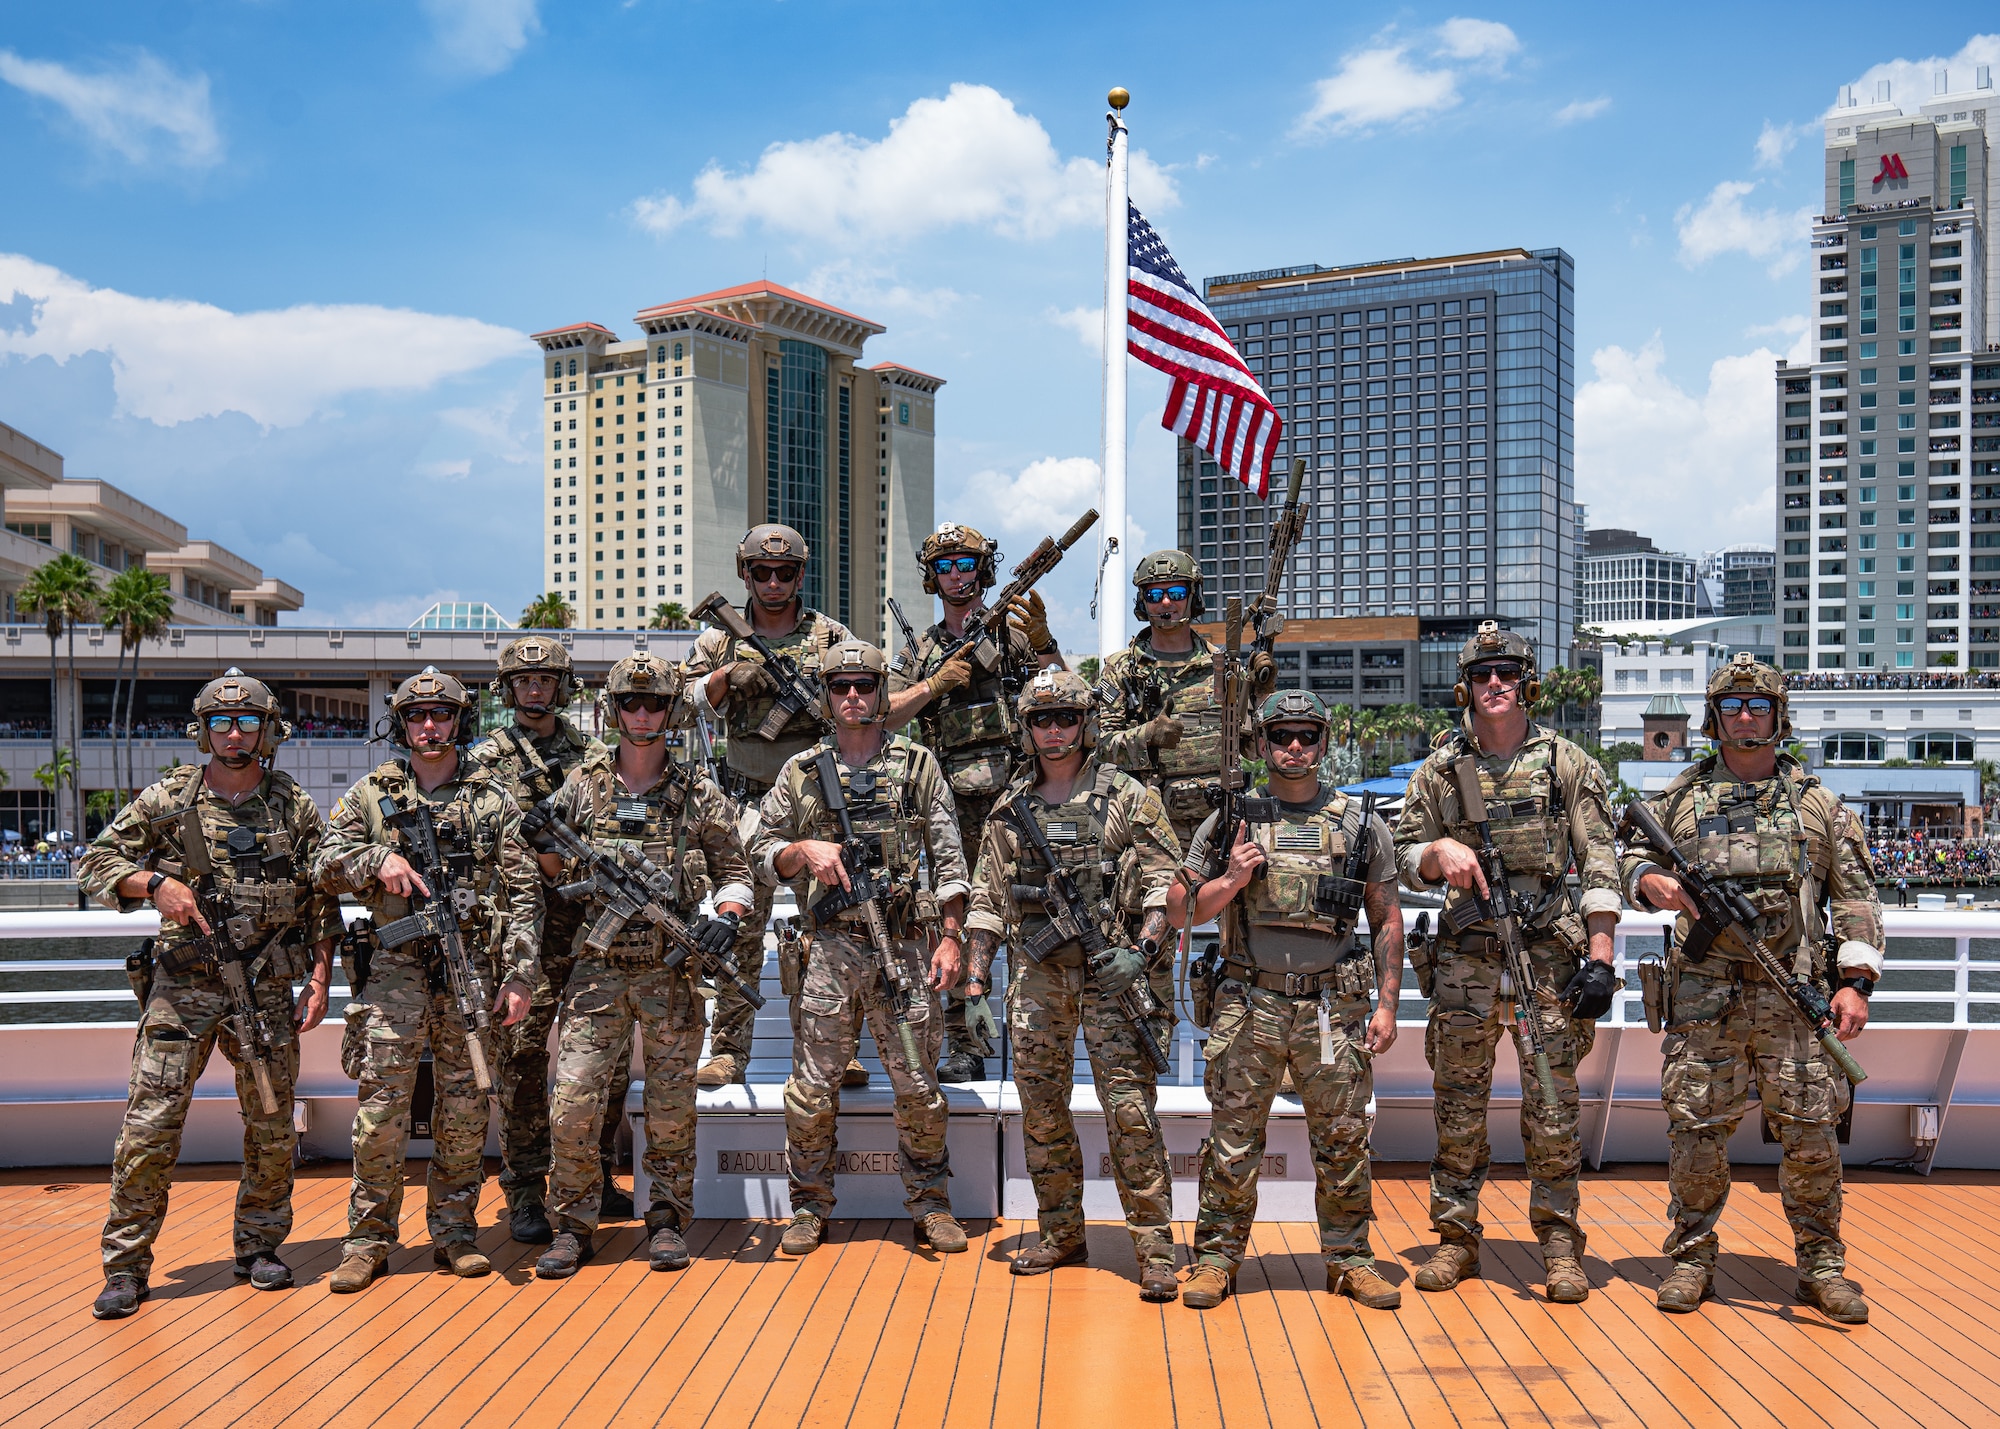 Members assigned to U.S. Special Operations Command pose for a photo following a Special Operations Forces (SOF) demonstration in Tampa, Florida, May 18, 2022.